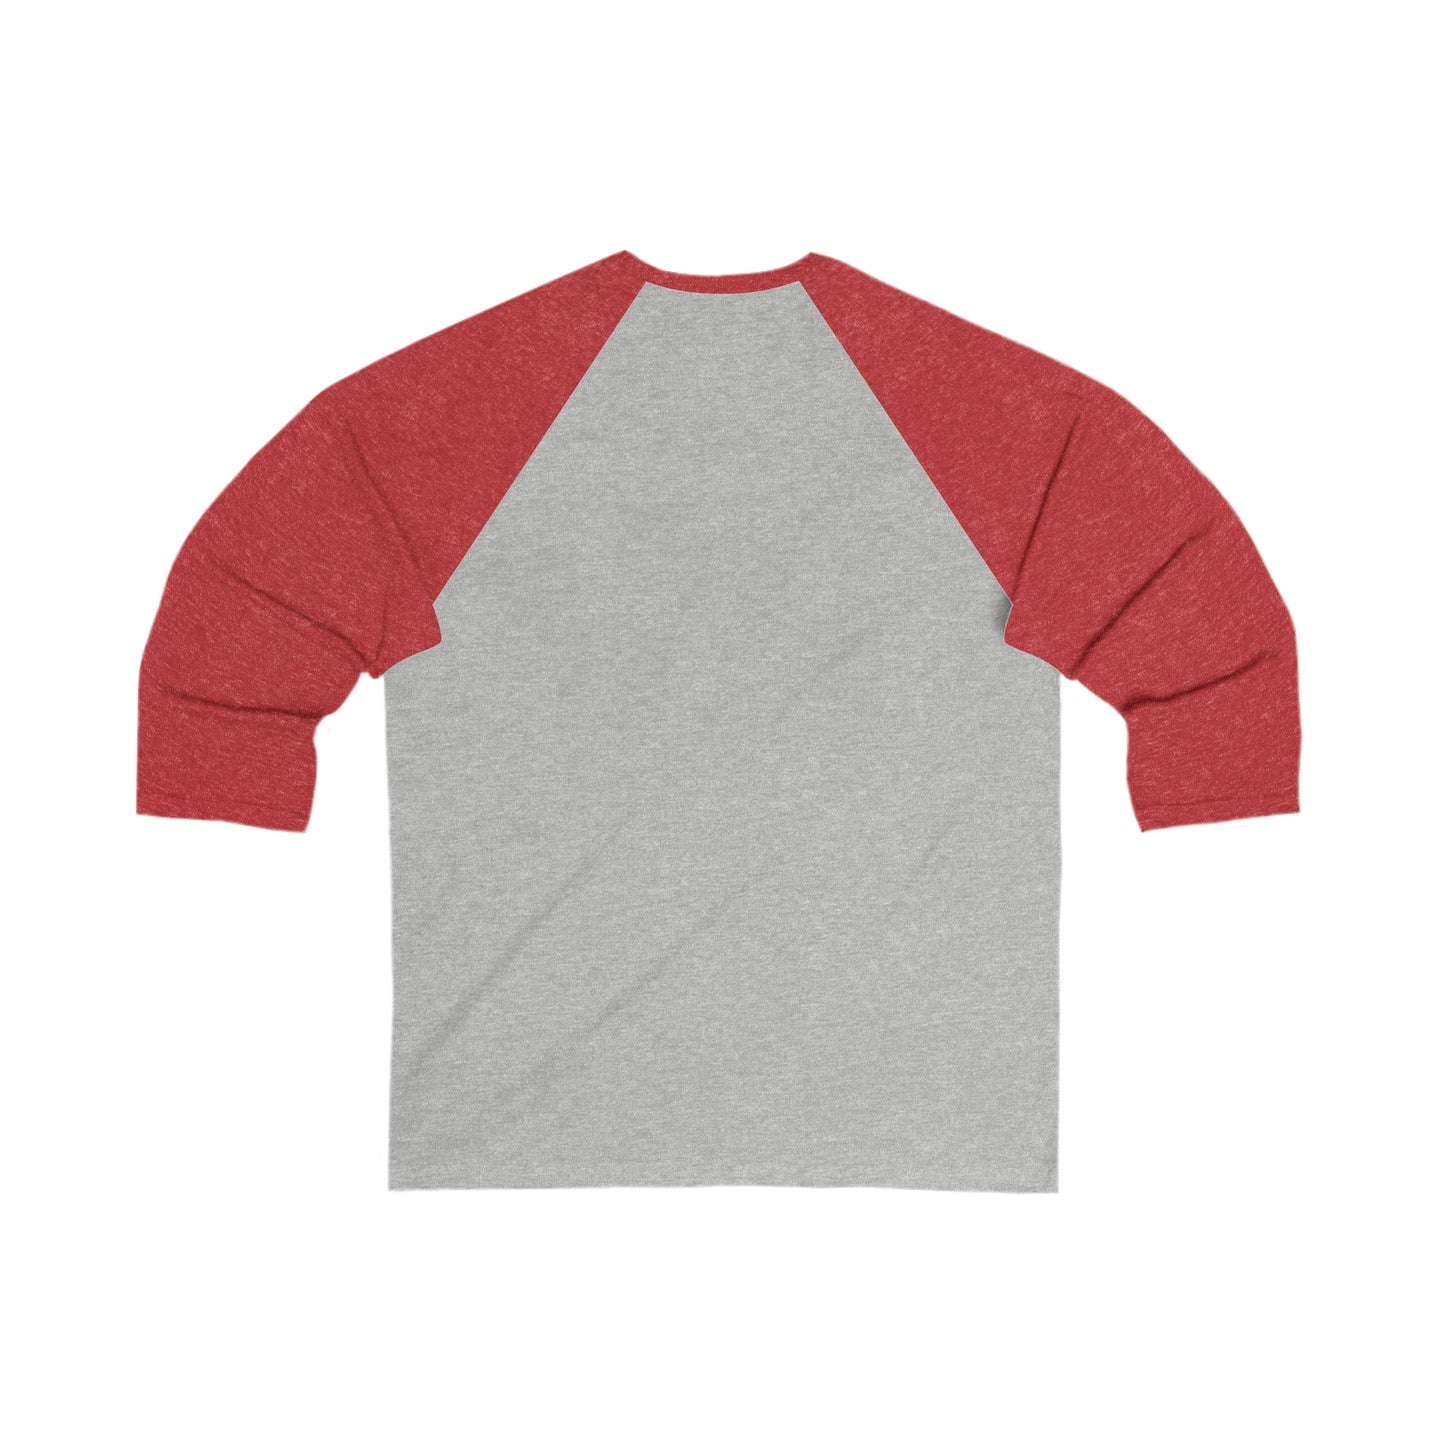 Flat back view of the red shirt